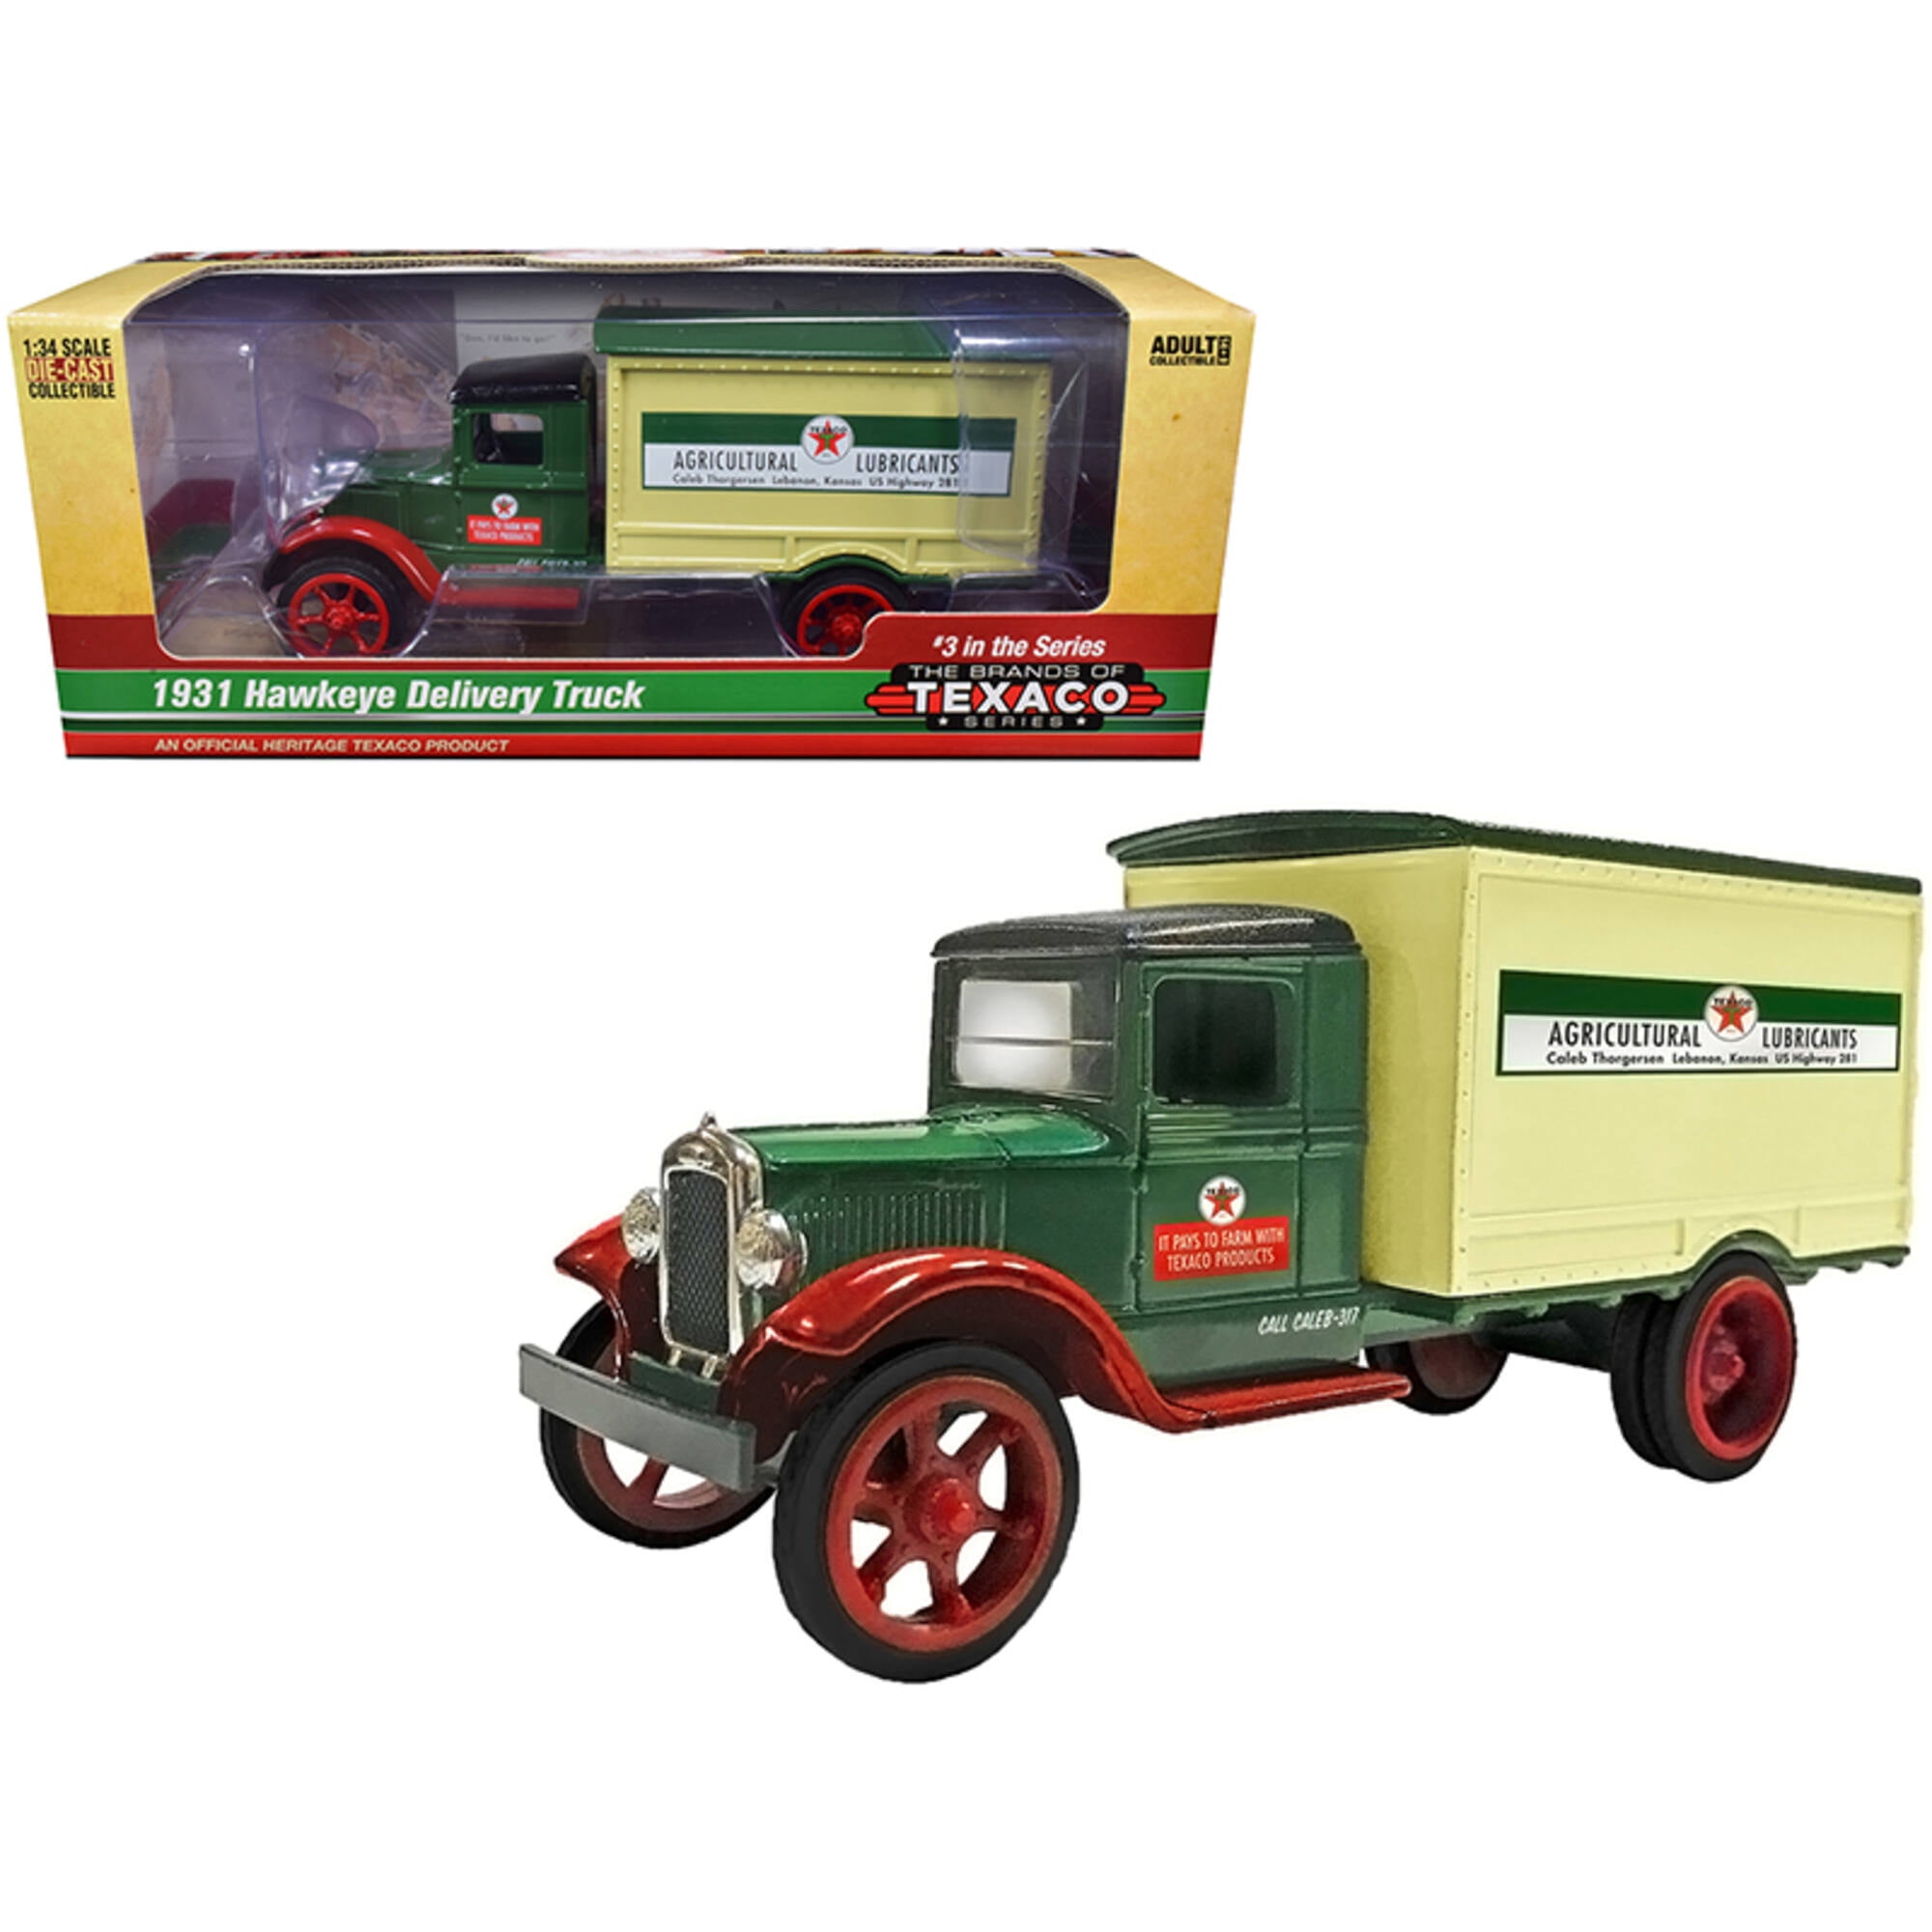 Picture of Autoworld CP7585 1931 Hawkeye Texaco Delivery Truck Agricultural Lubricants 3rd in the Series the Brands of Texaco Series 1 by 34 Diecast Model